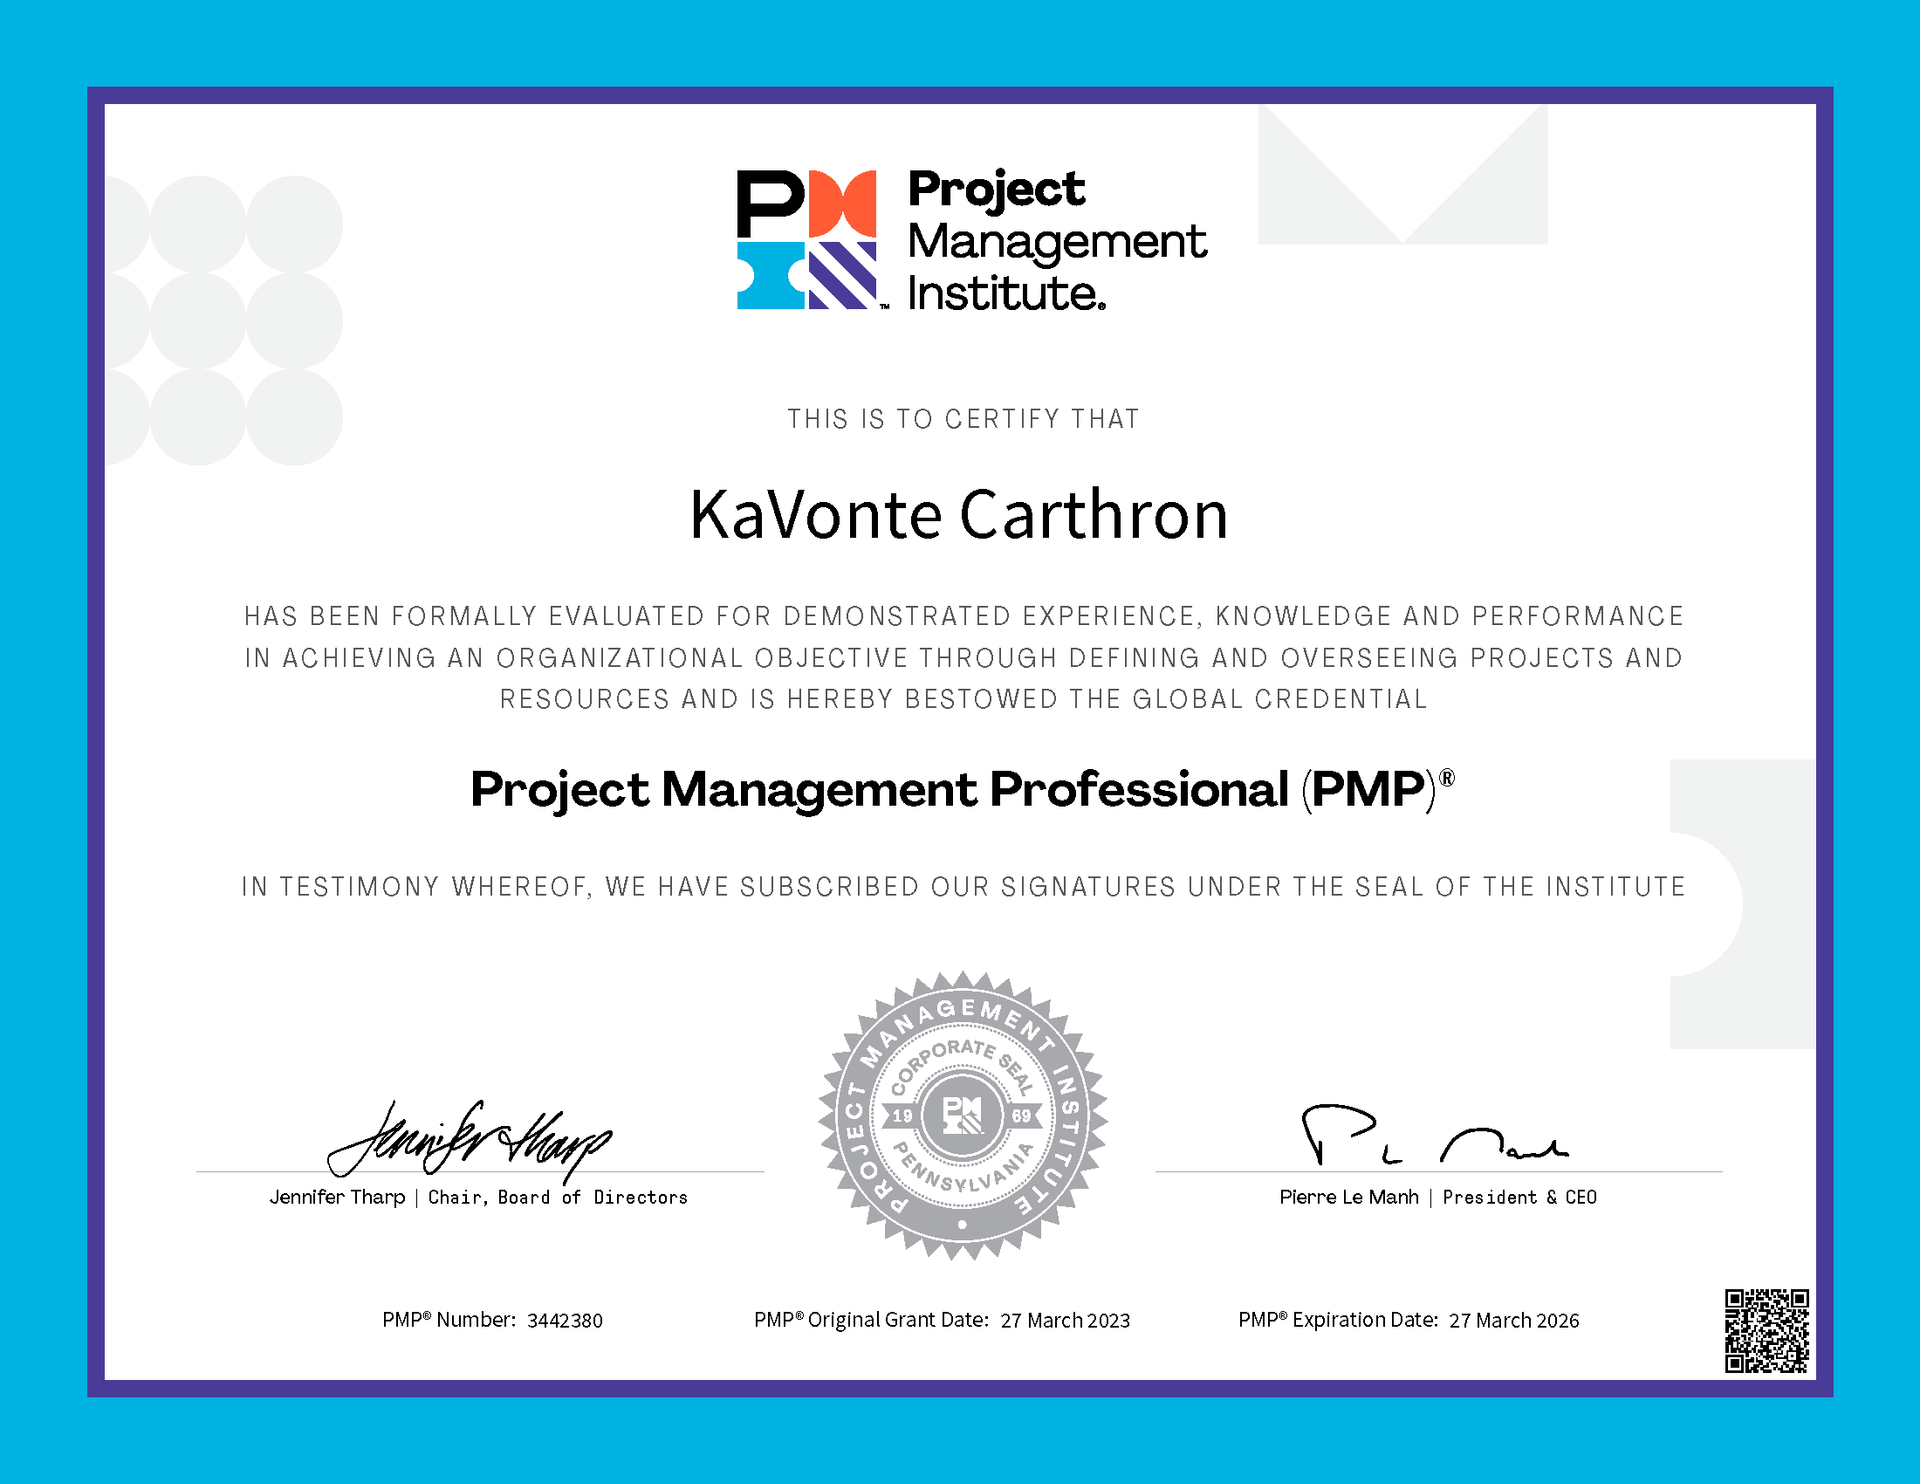 Project Management Professional Certification with Project Management Institute